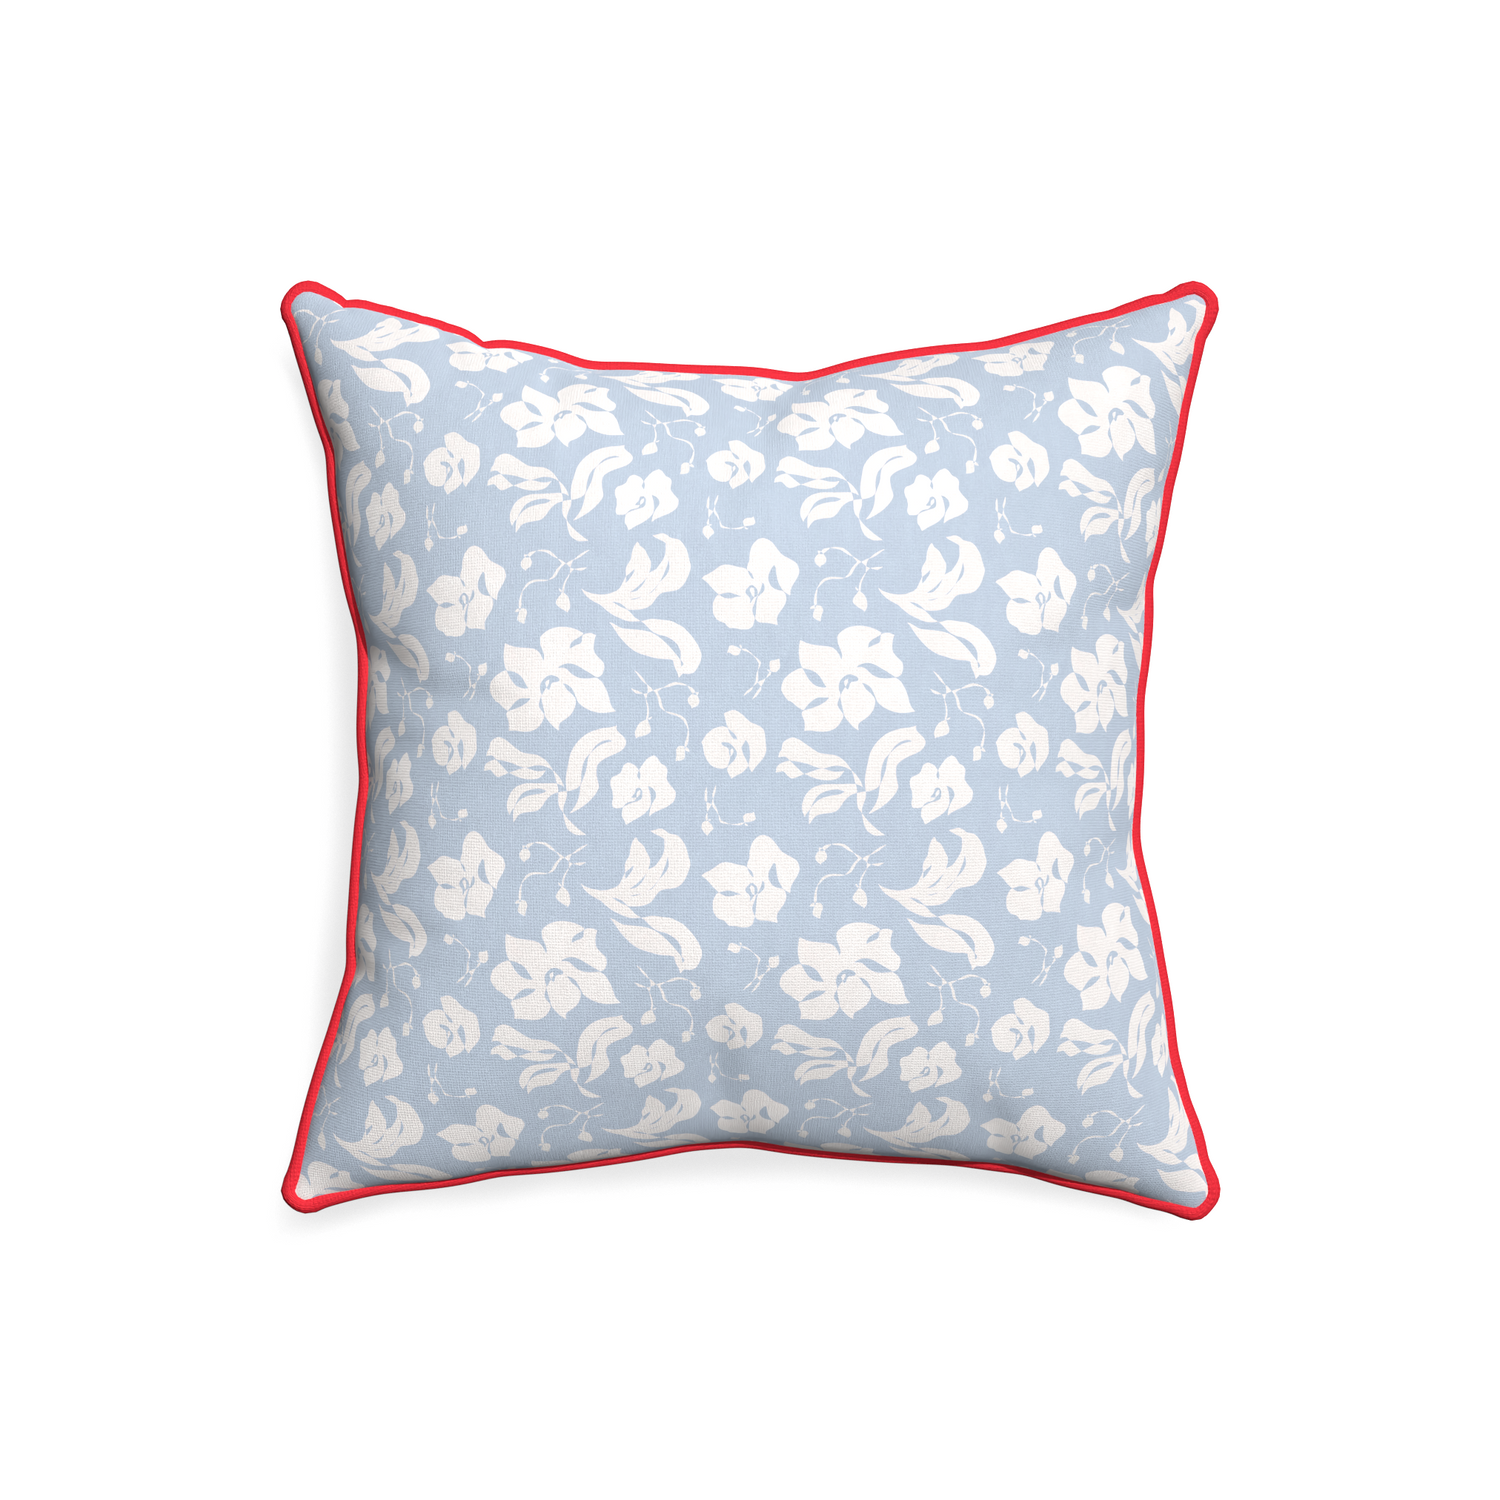 20-square georgia custom pillow with cherry piping on white background